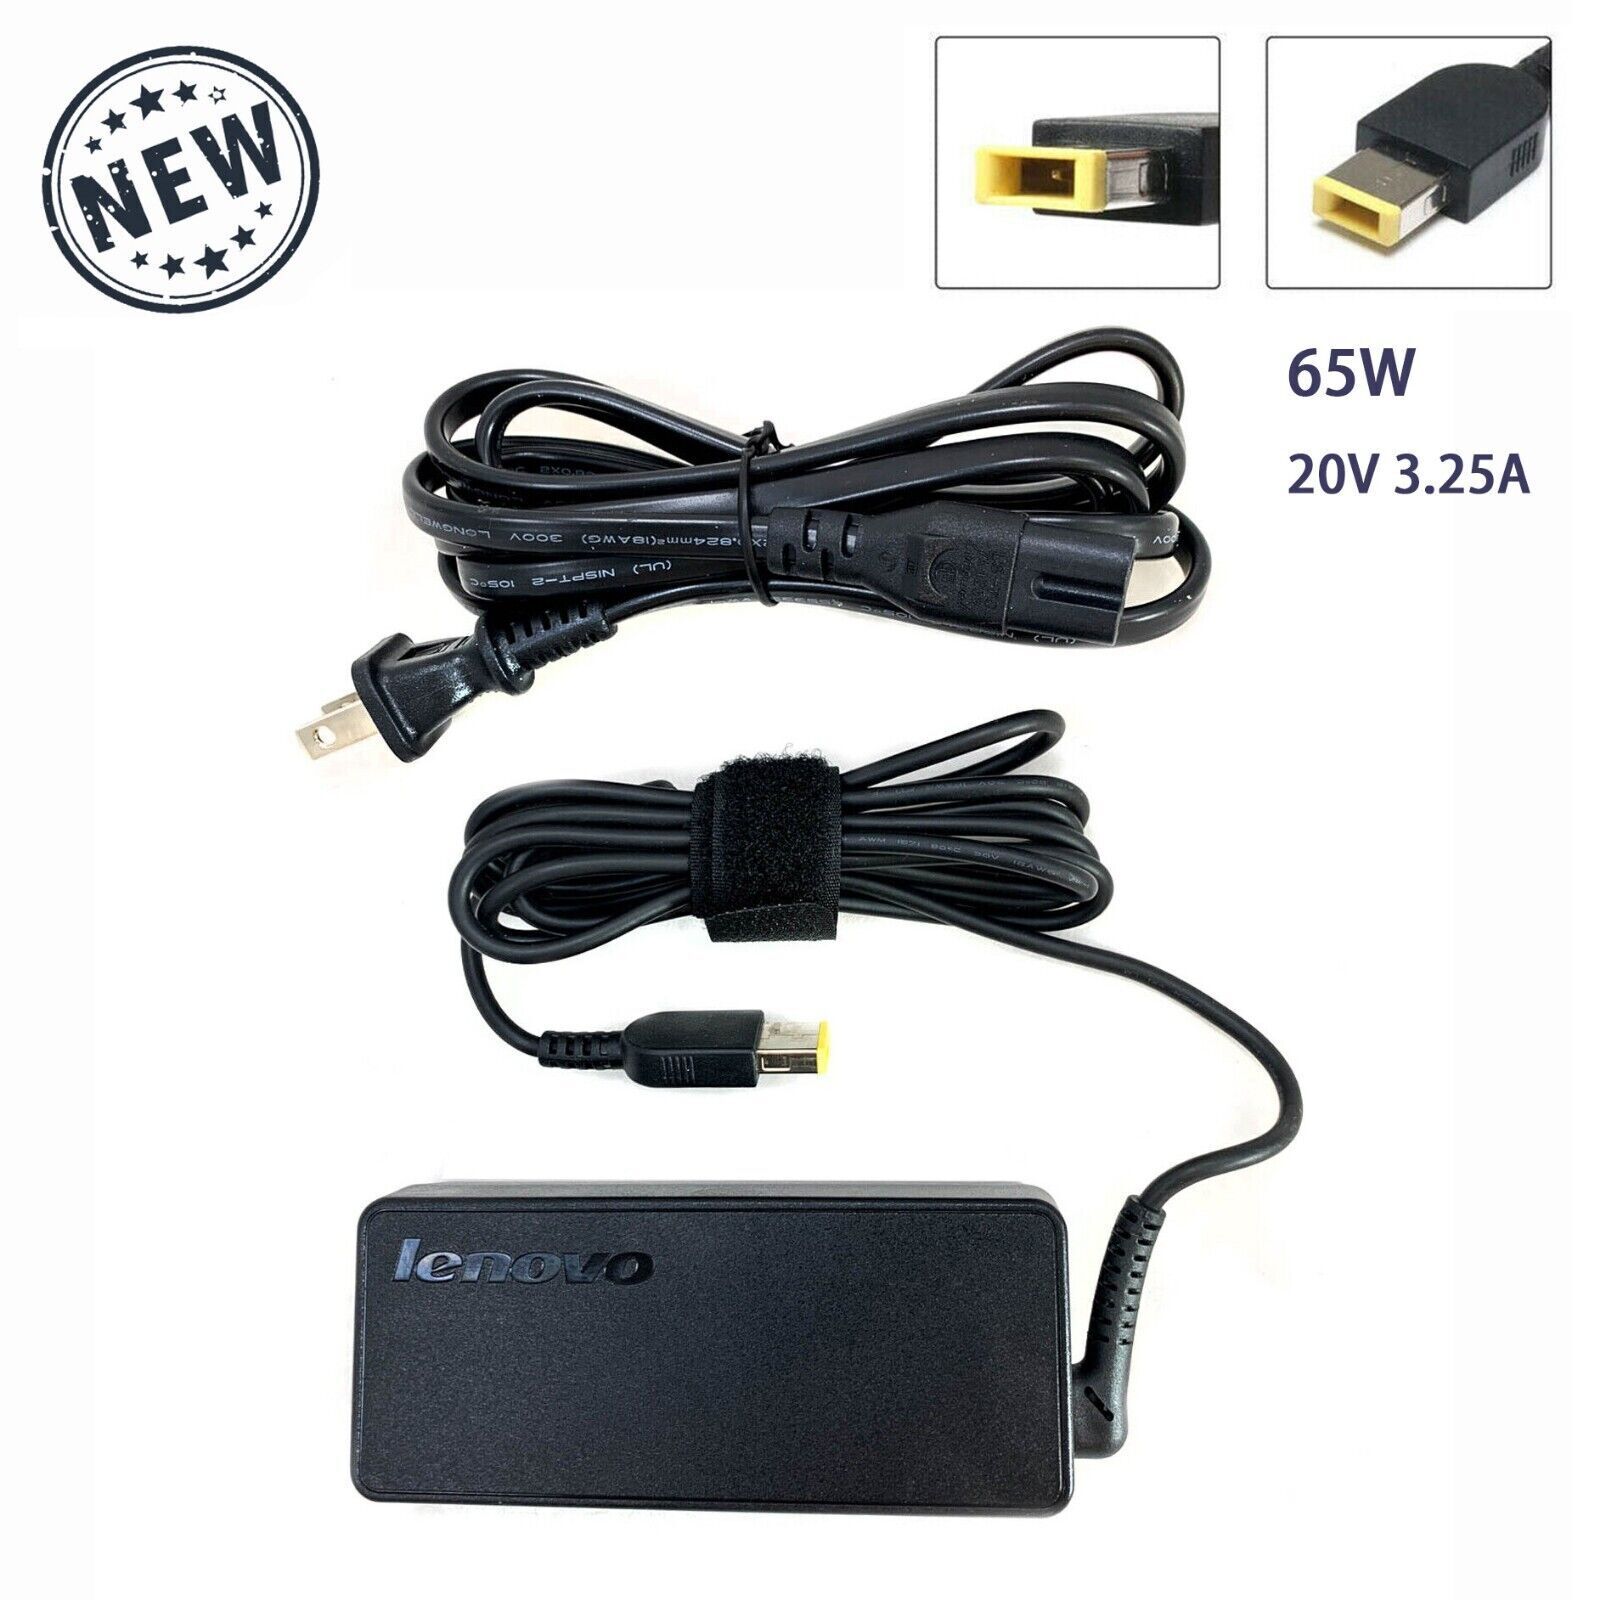 OEM 65W 20V 3.25A AC Adapter Laptop Charger For Lenovo ThinkPad SQUARE SLIM TIP